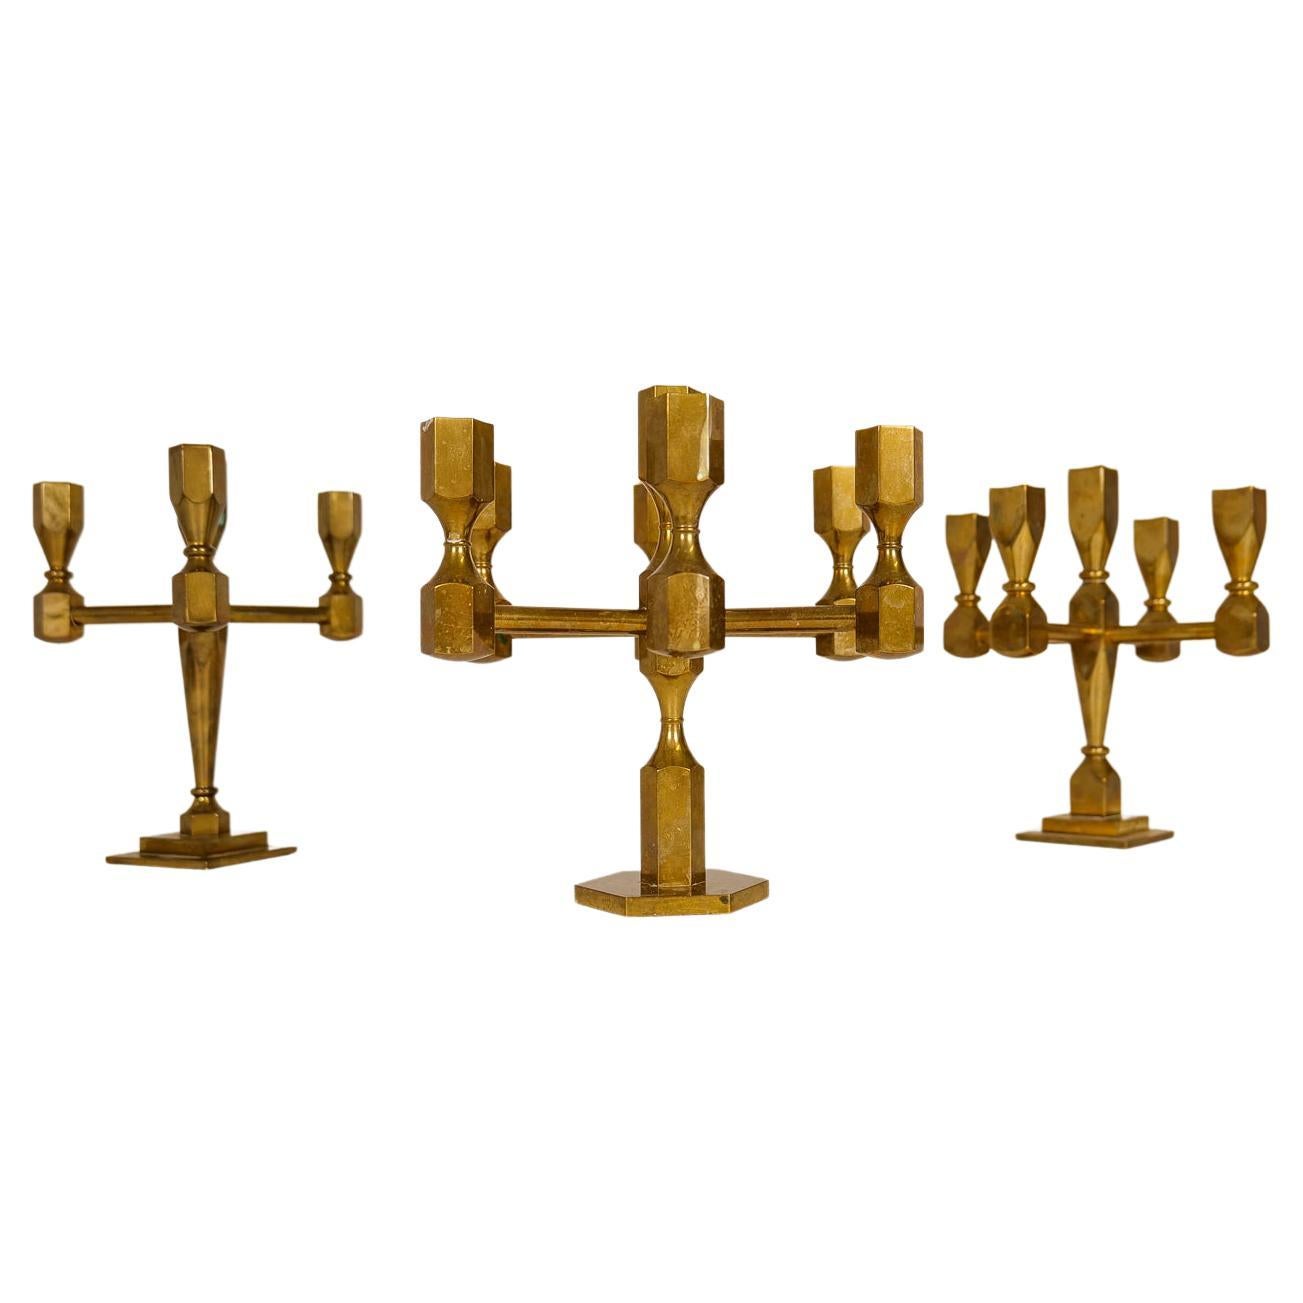 Set of 3 large and heavy Gusum brass table chandelier for seven candles. Wonderful in solid brass is this Candelabra made in Sweden in the 1970s.

Good patinated vintage condition with wear. 

Dimensions: 25 cm. x 25 cm, 25 cm x 22 cm and 25 cm